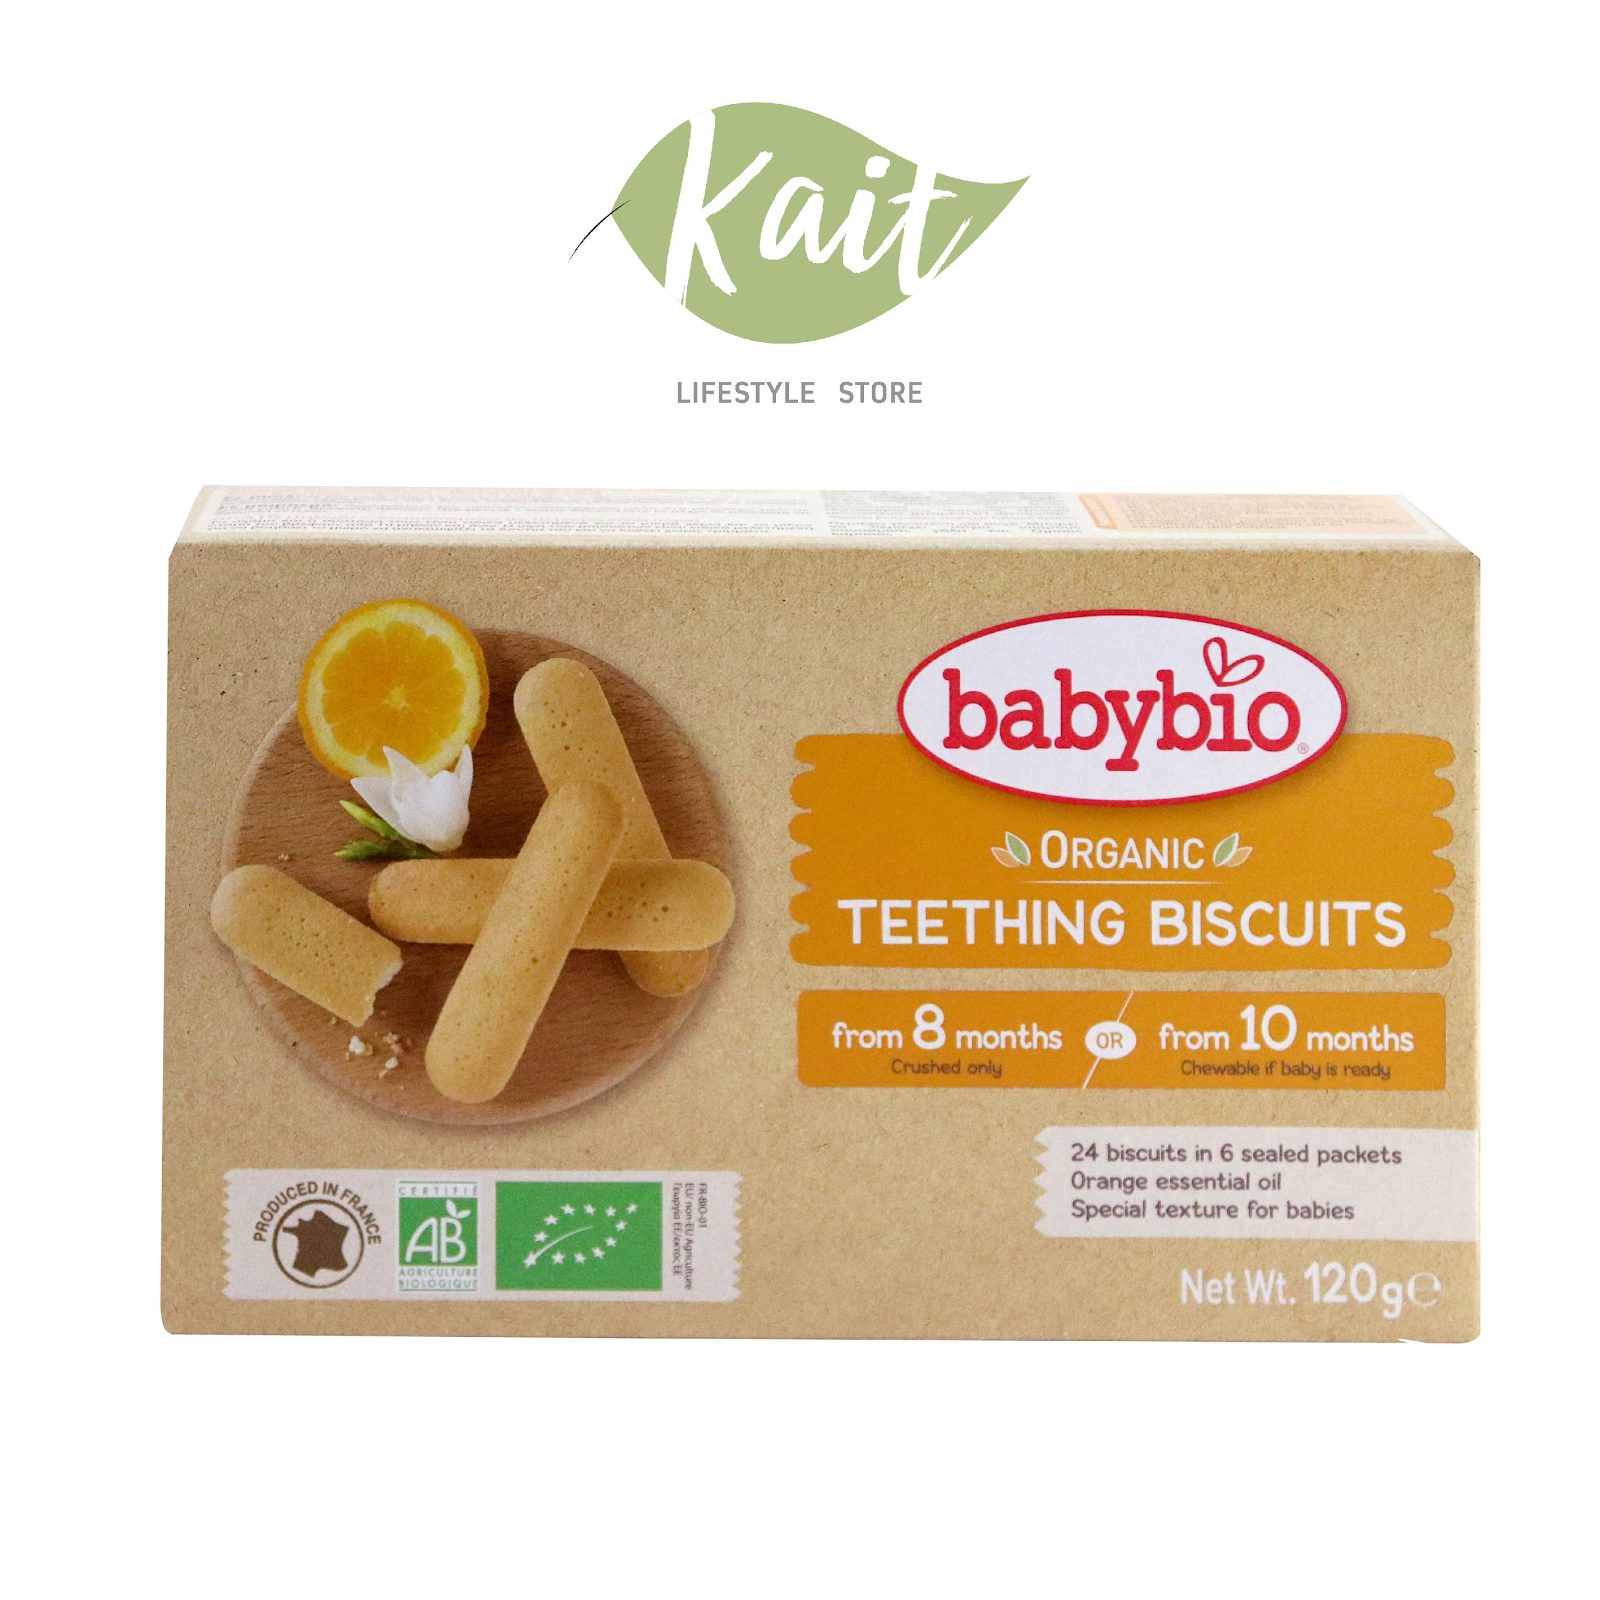 Babybio – Certified Organic Formulated Milk from France